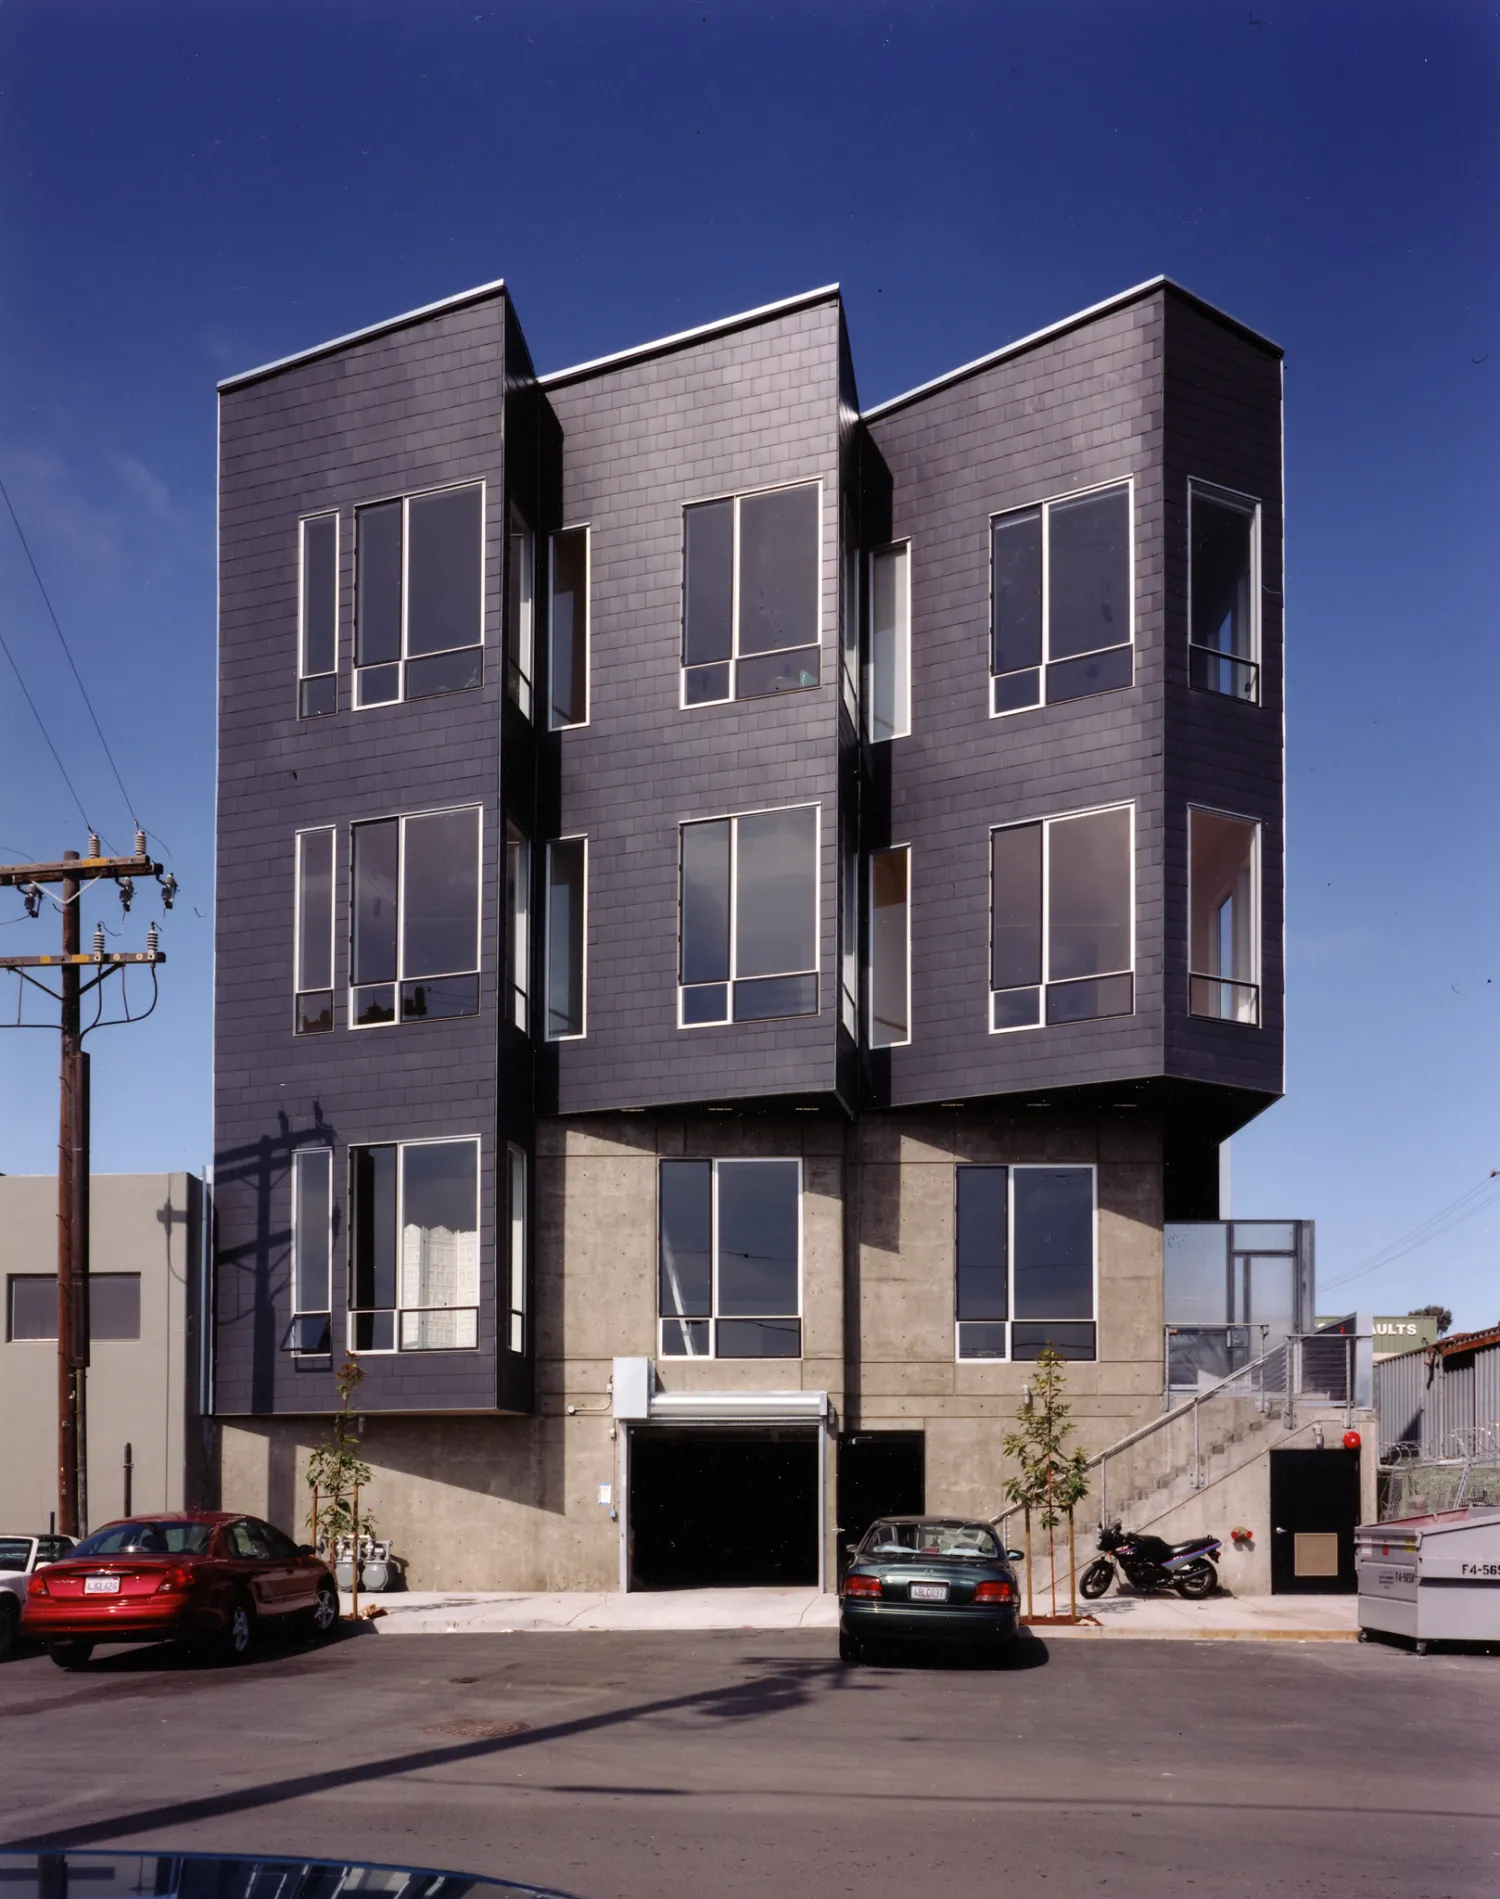 Exterior view of Indiana Industrial Lofts in San Francisco.